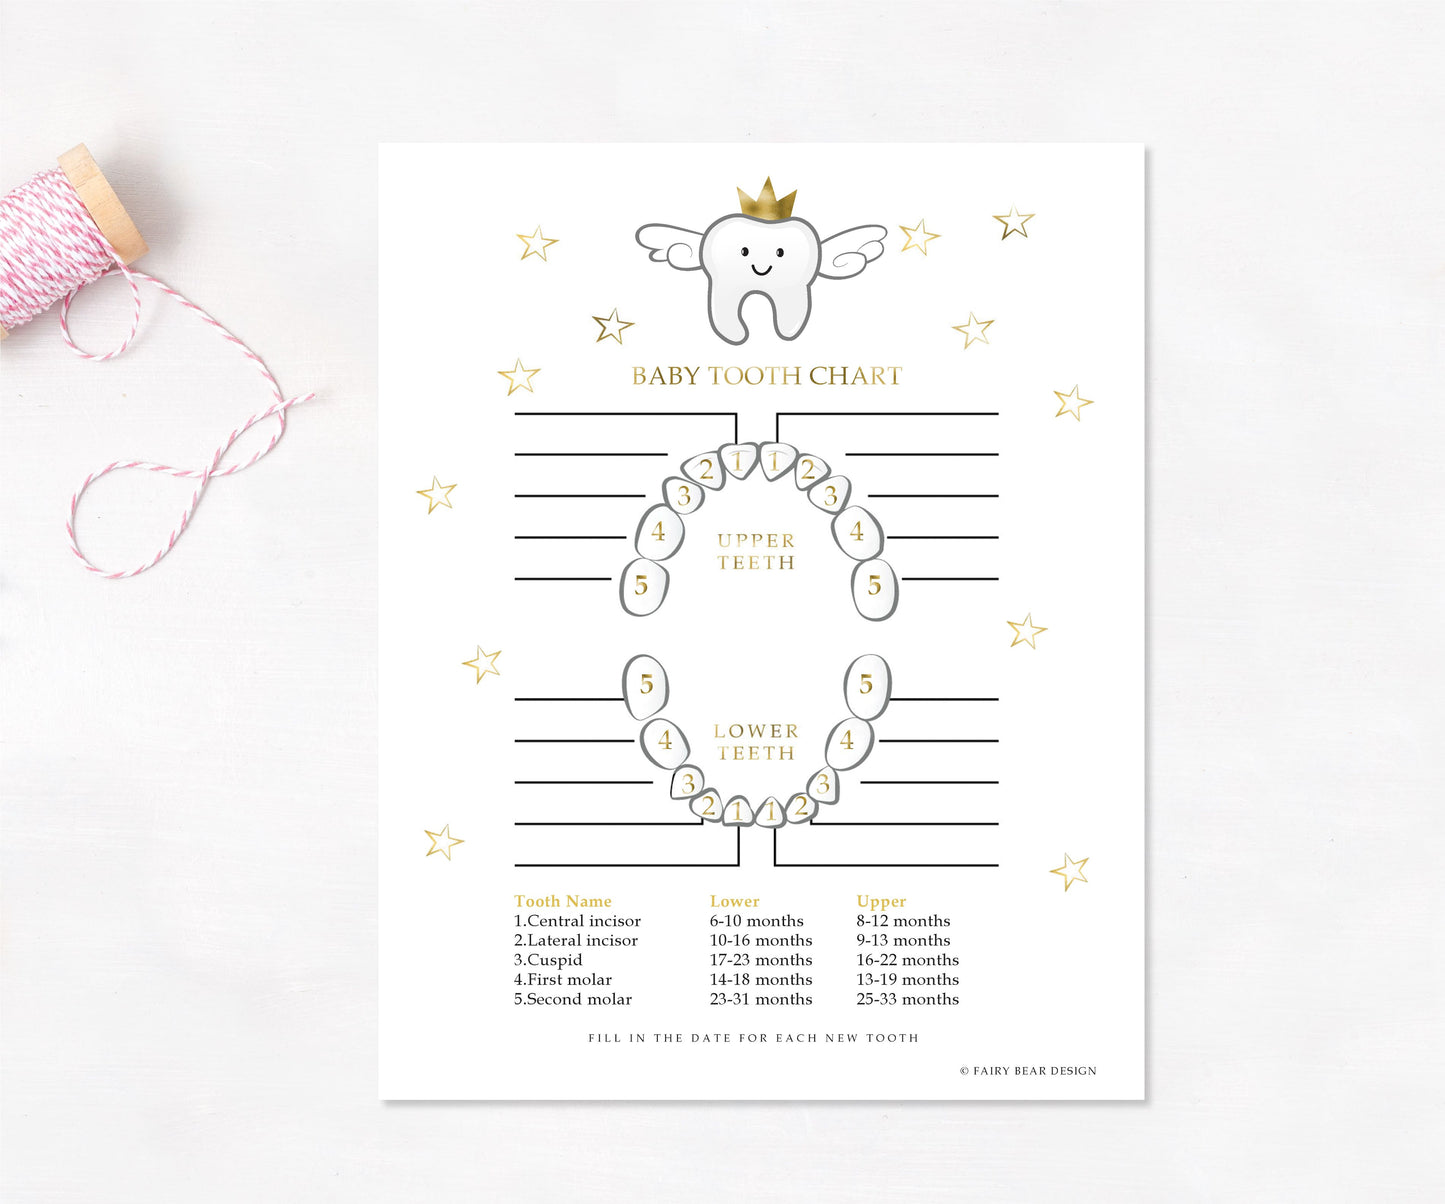 Printable Baby Tooth Chart - Gold 8x10